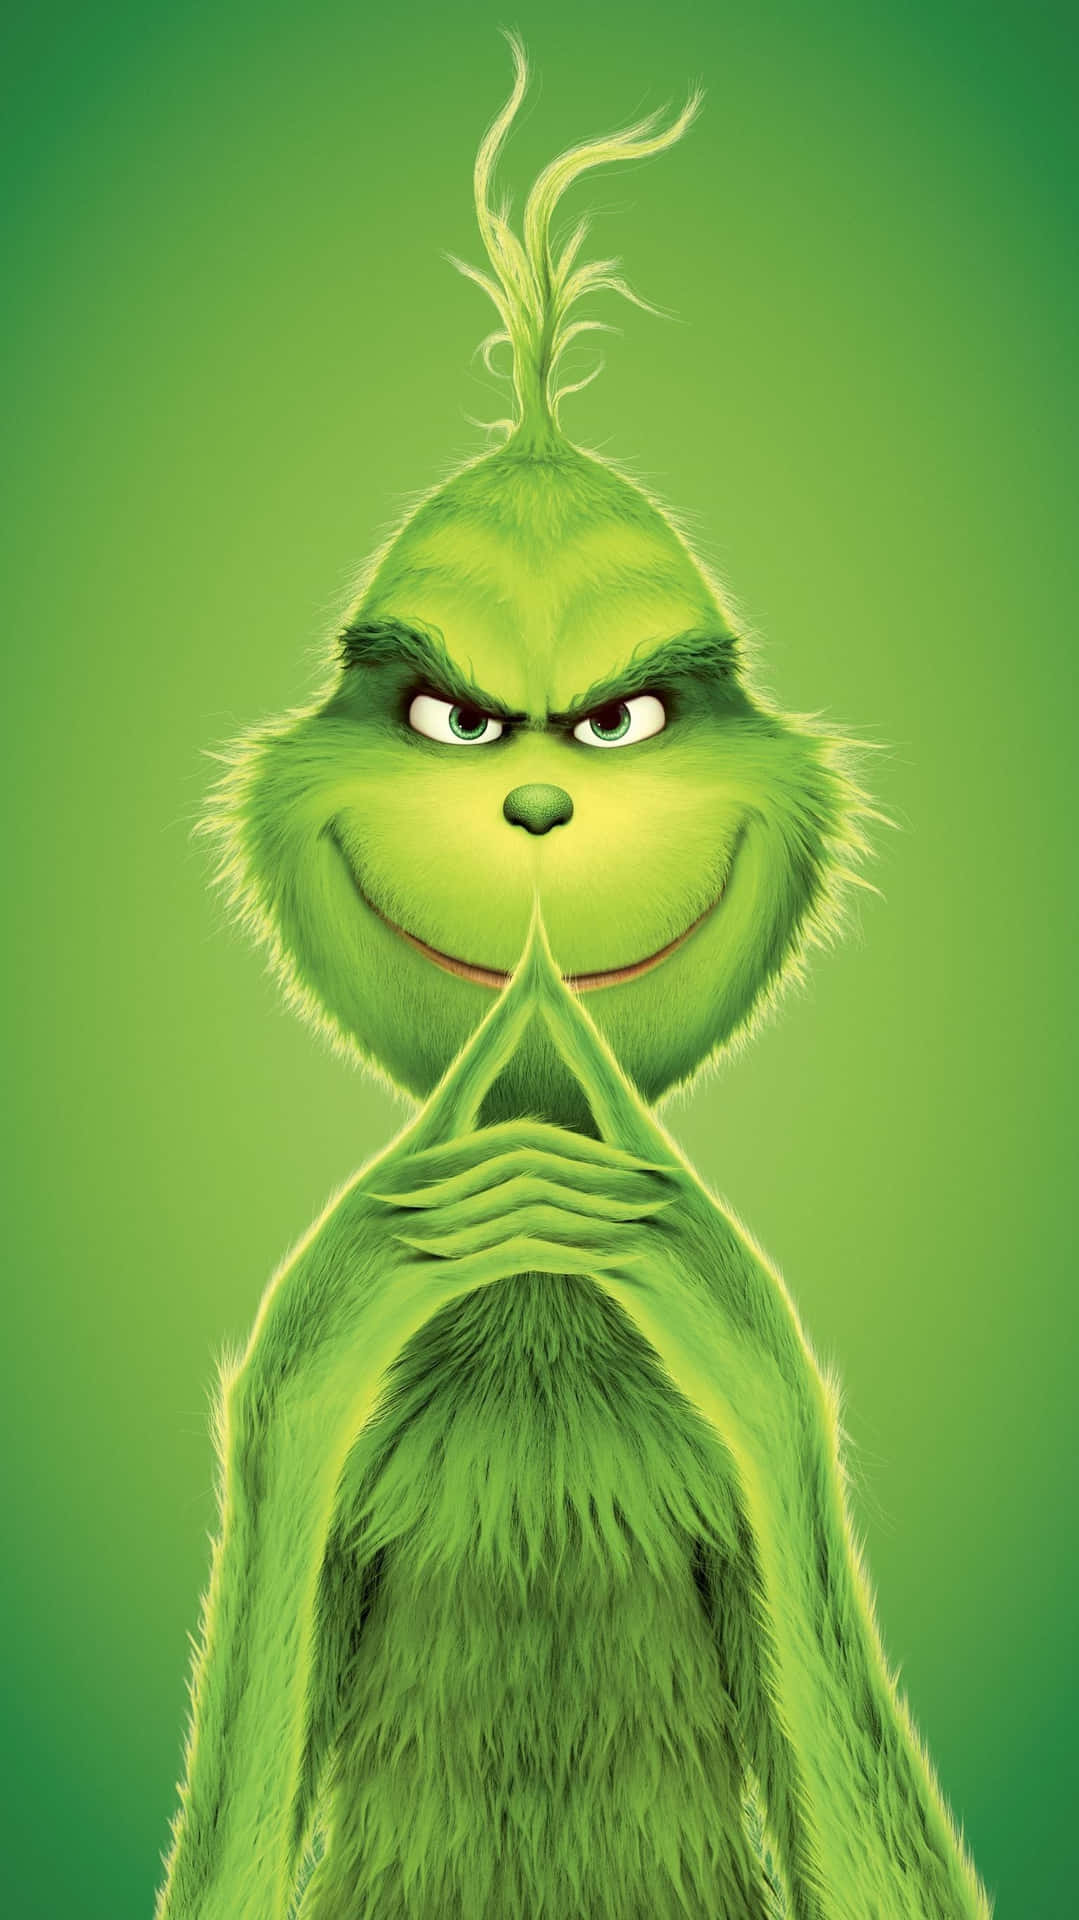 Join The Grinch In Celebrating Christmas! Background